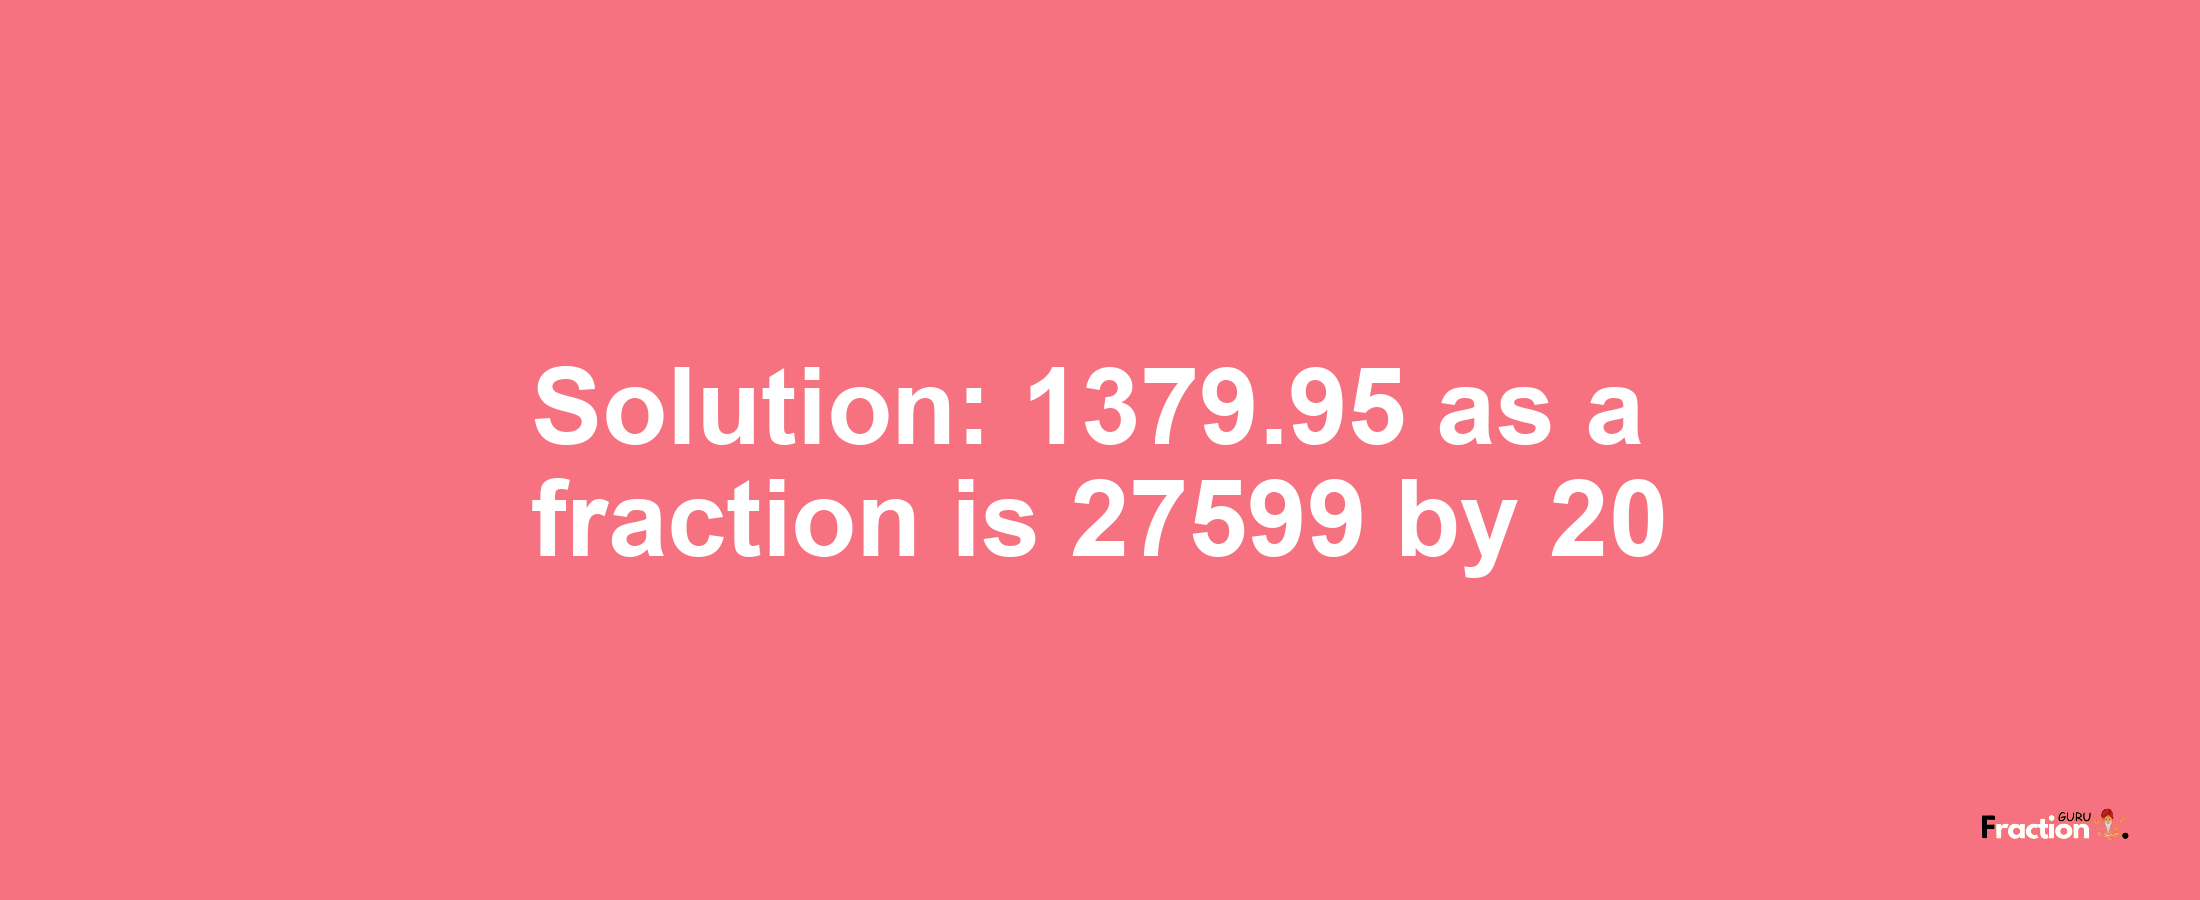 Solution:1379.95 as a fraction is 27599/20